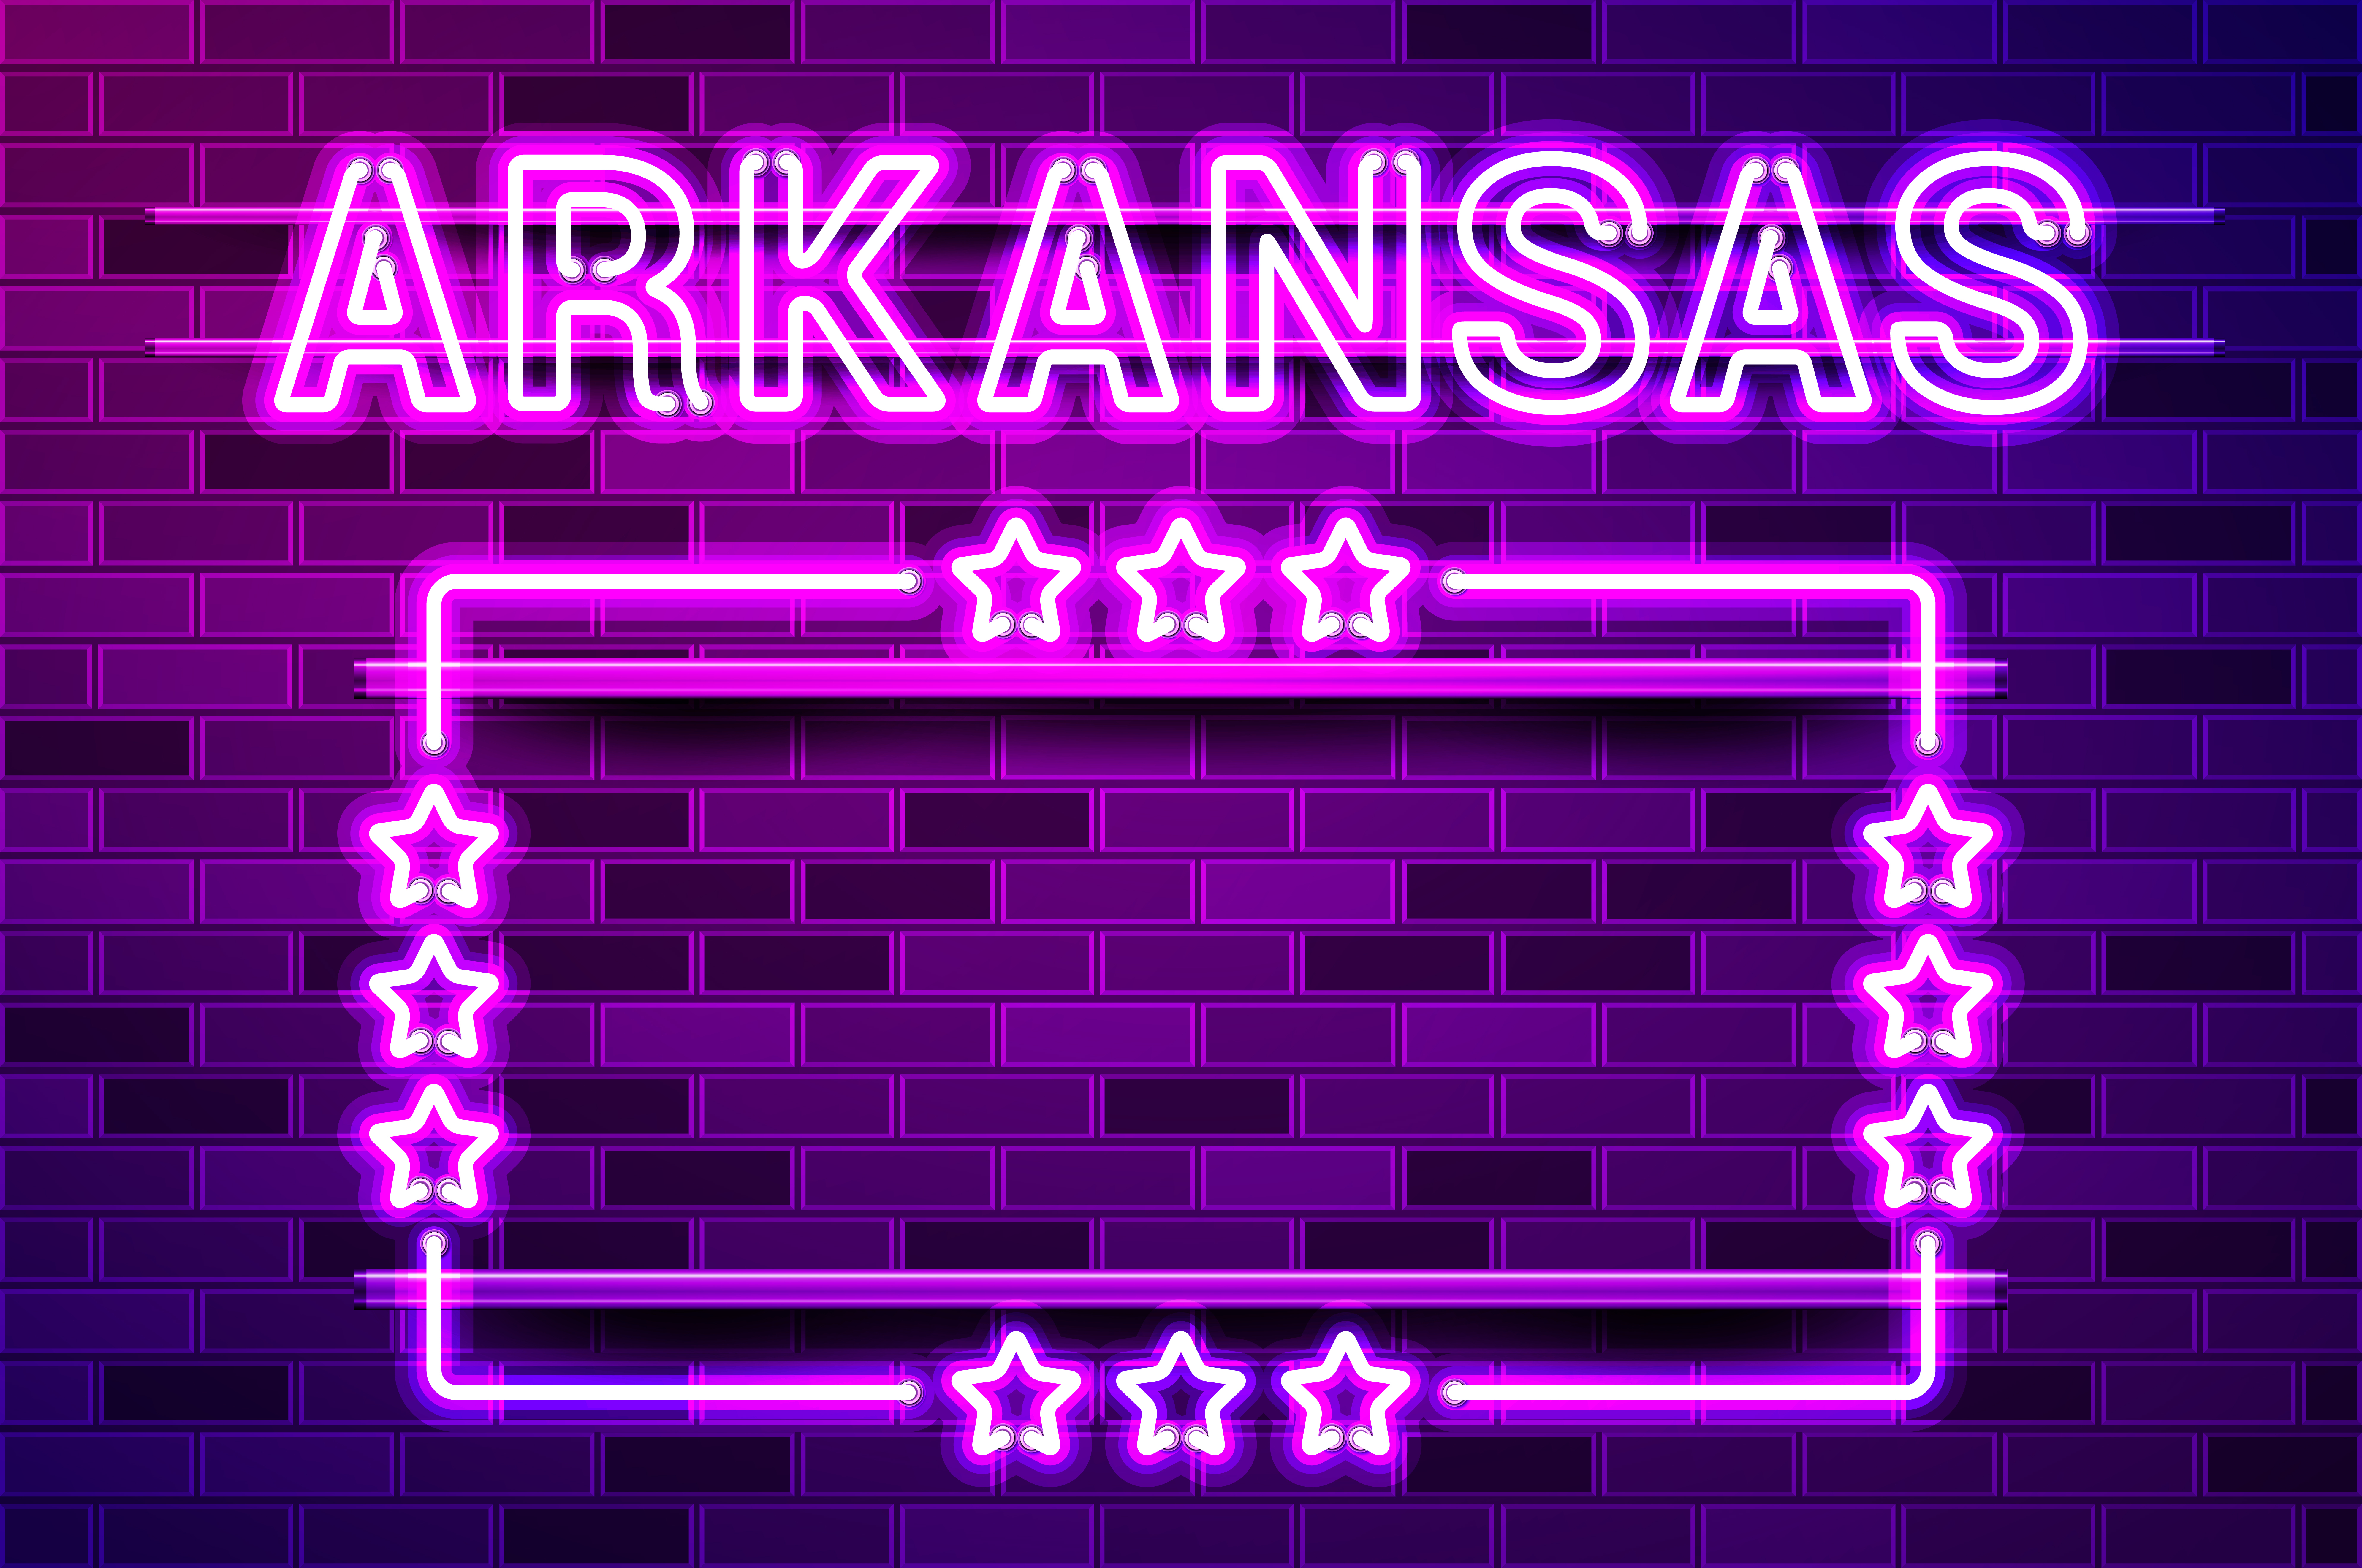 Arkansas US State glowing purple neon lettering and a rectangular frame with stars. Realistic vector illustration. Purple brick wall, violet glow, metal holders.. Arkansas US State glowing purple neon lettering and a rectangular frame with stars